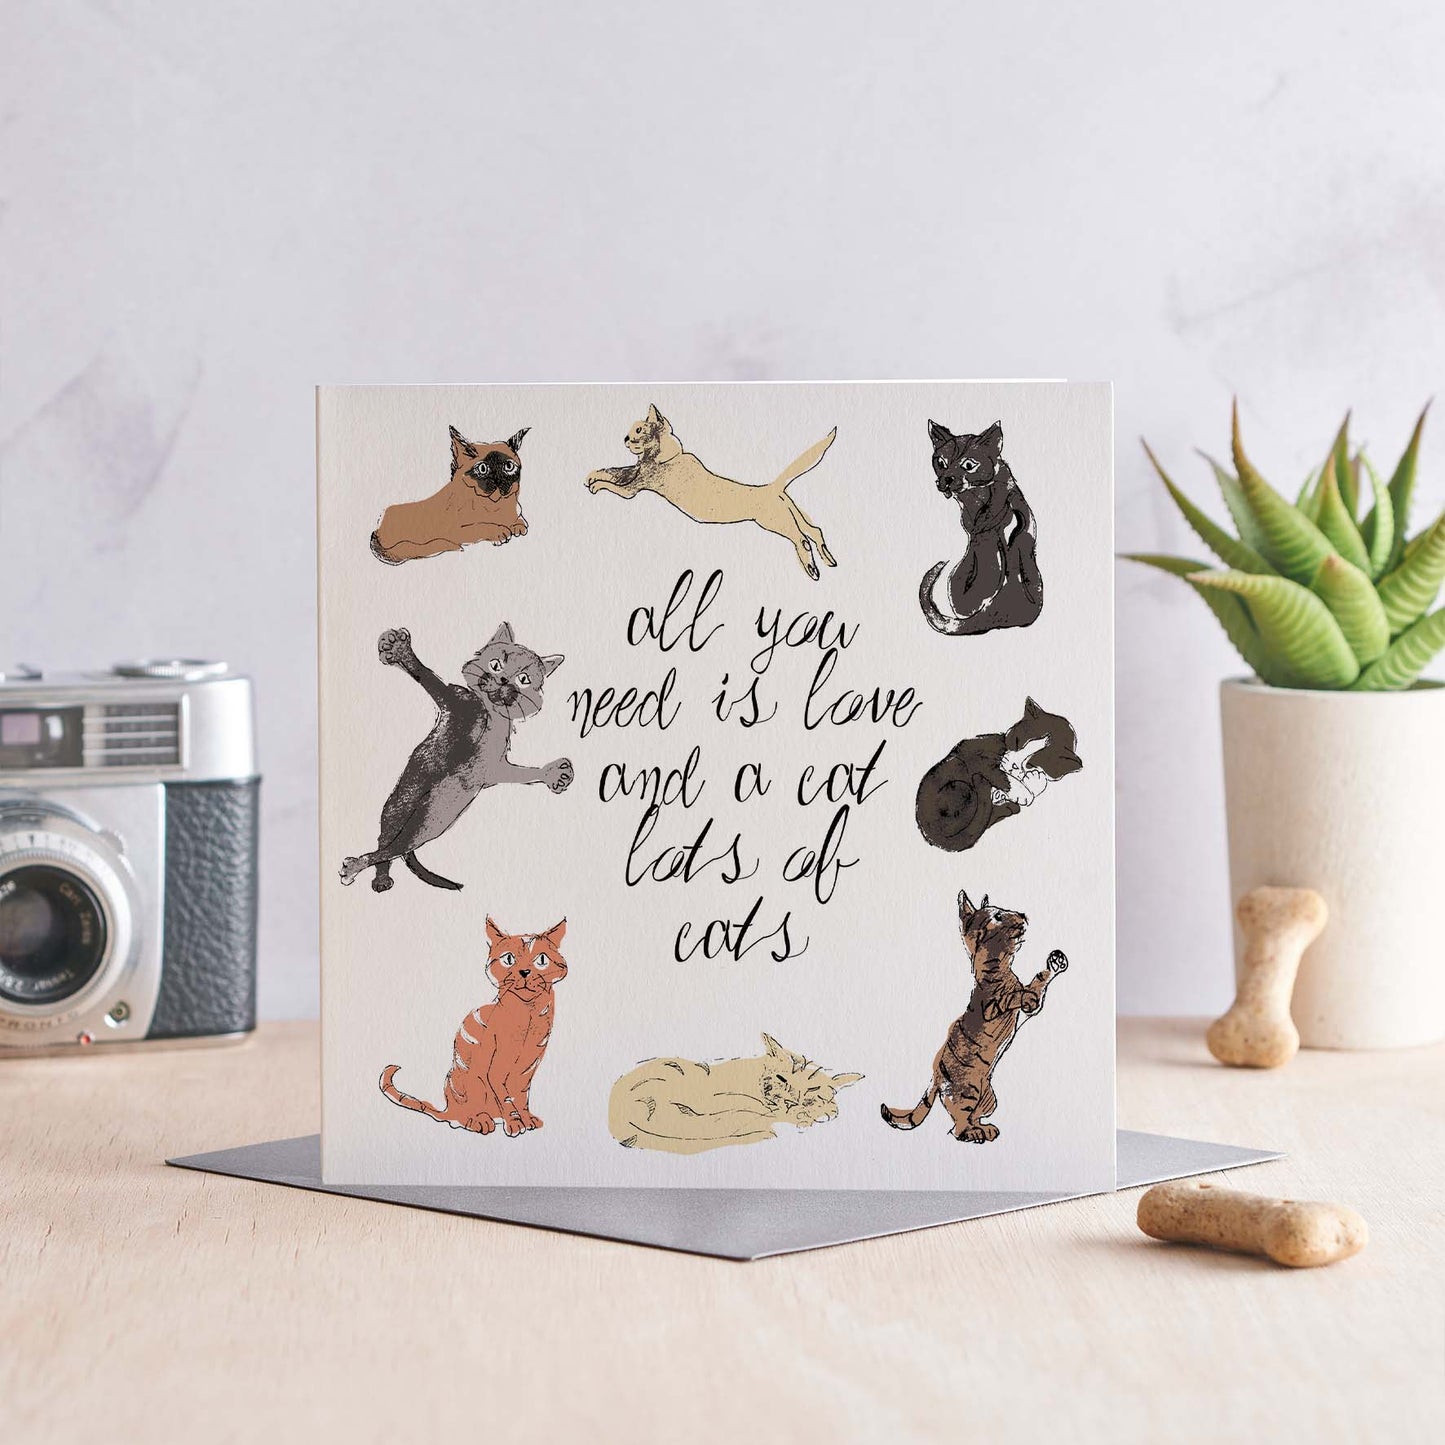 All you need is love and a cat, lots of cats - Greeting Card